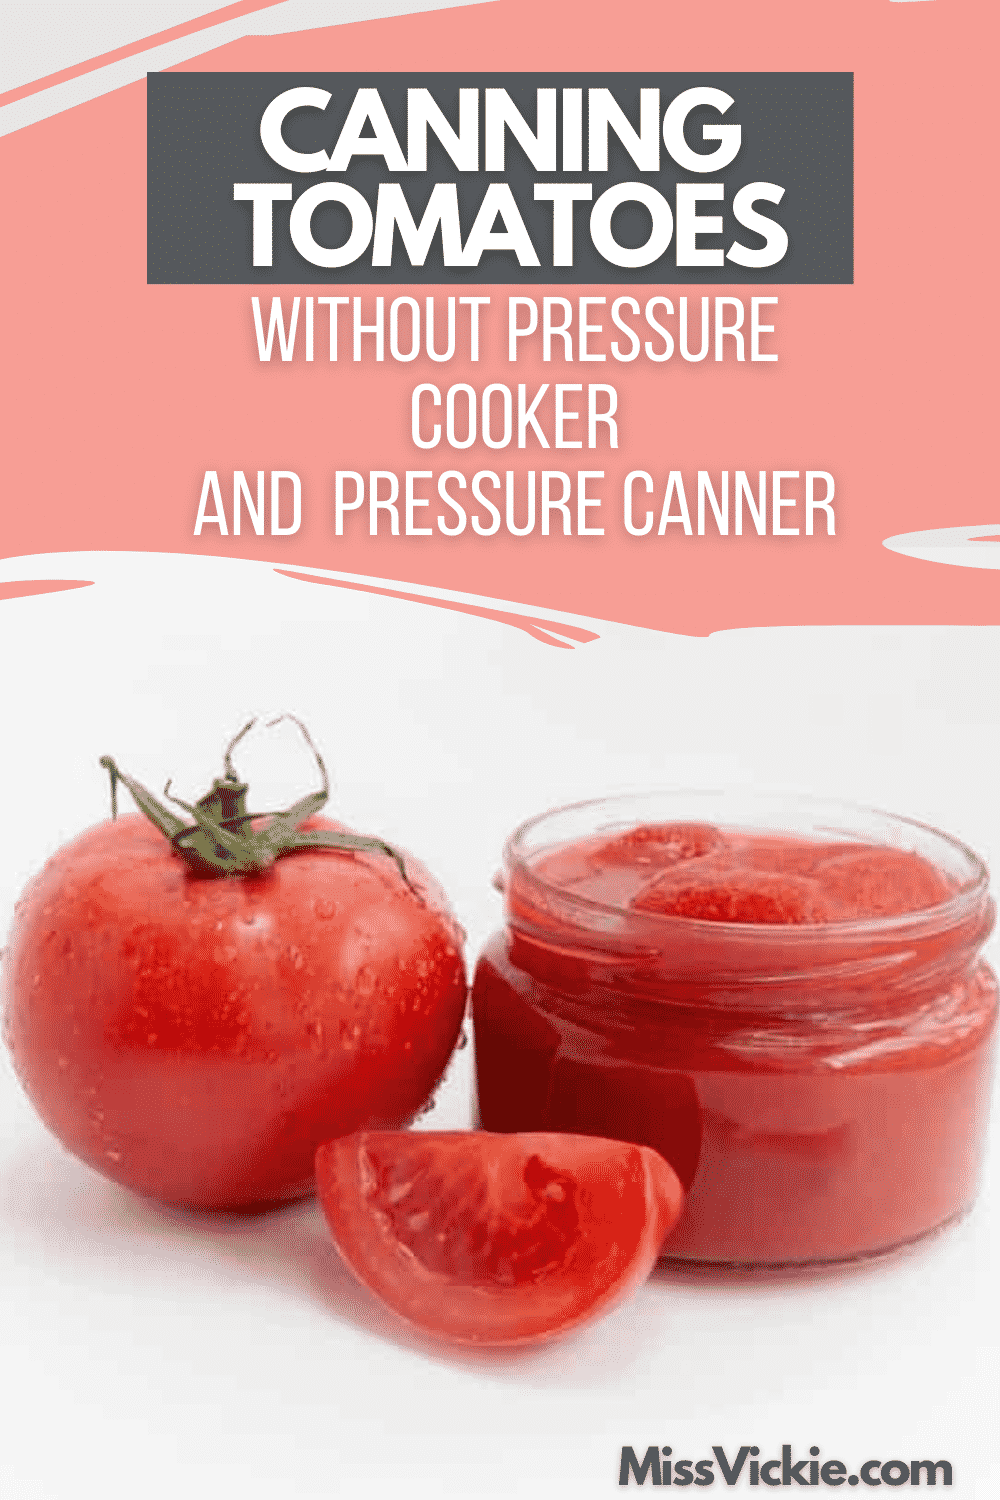 Canning Tomatoes Without Pressure Cooker And Canner